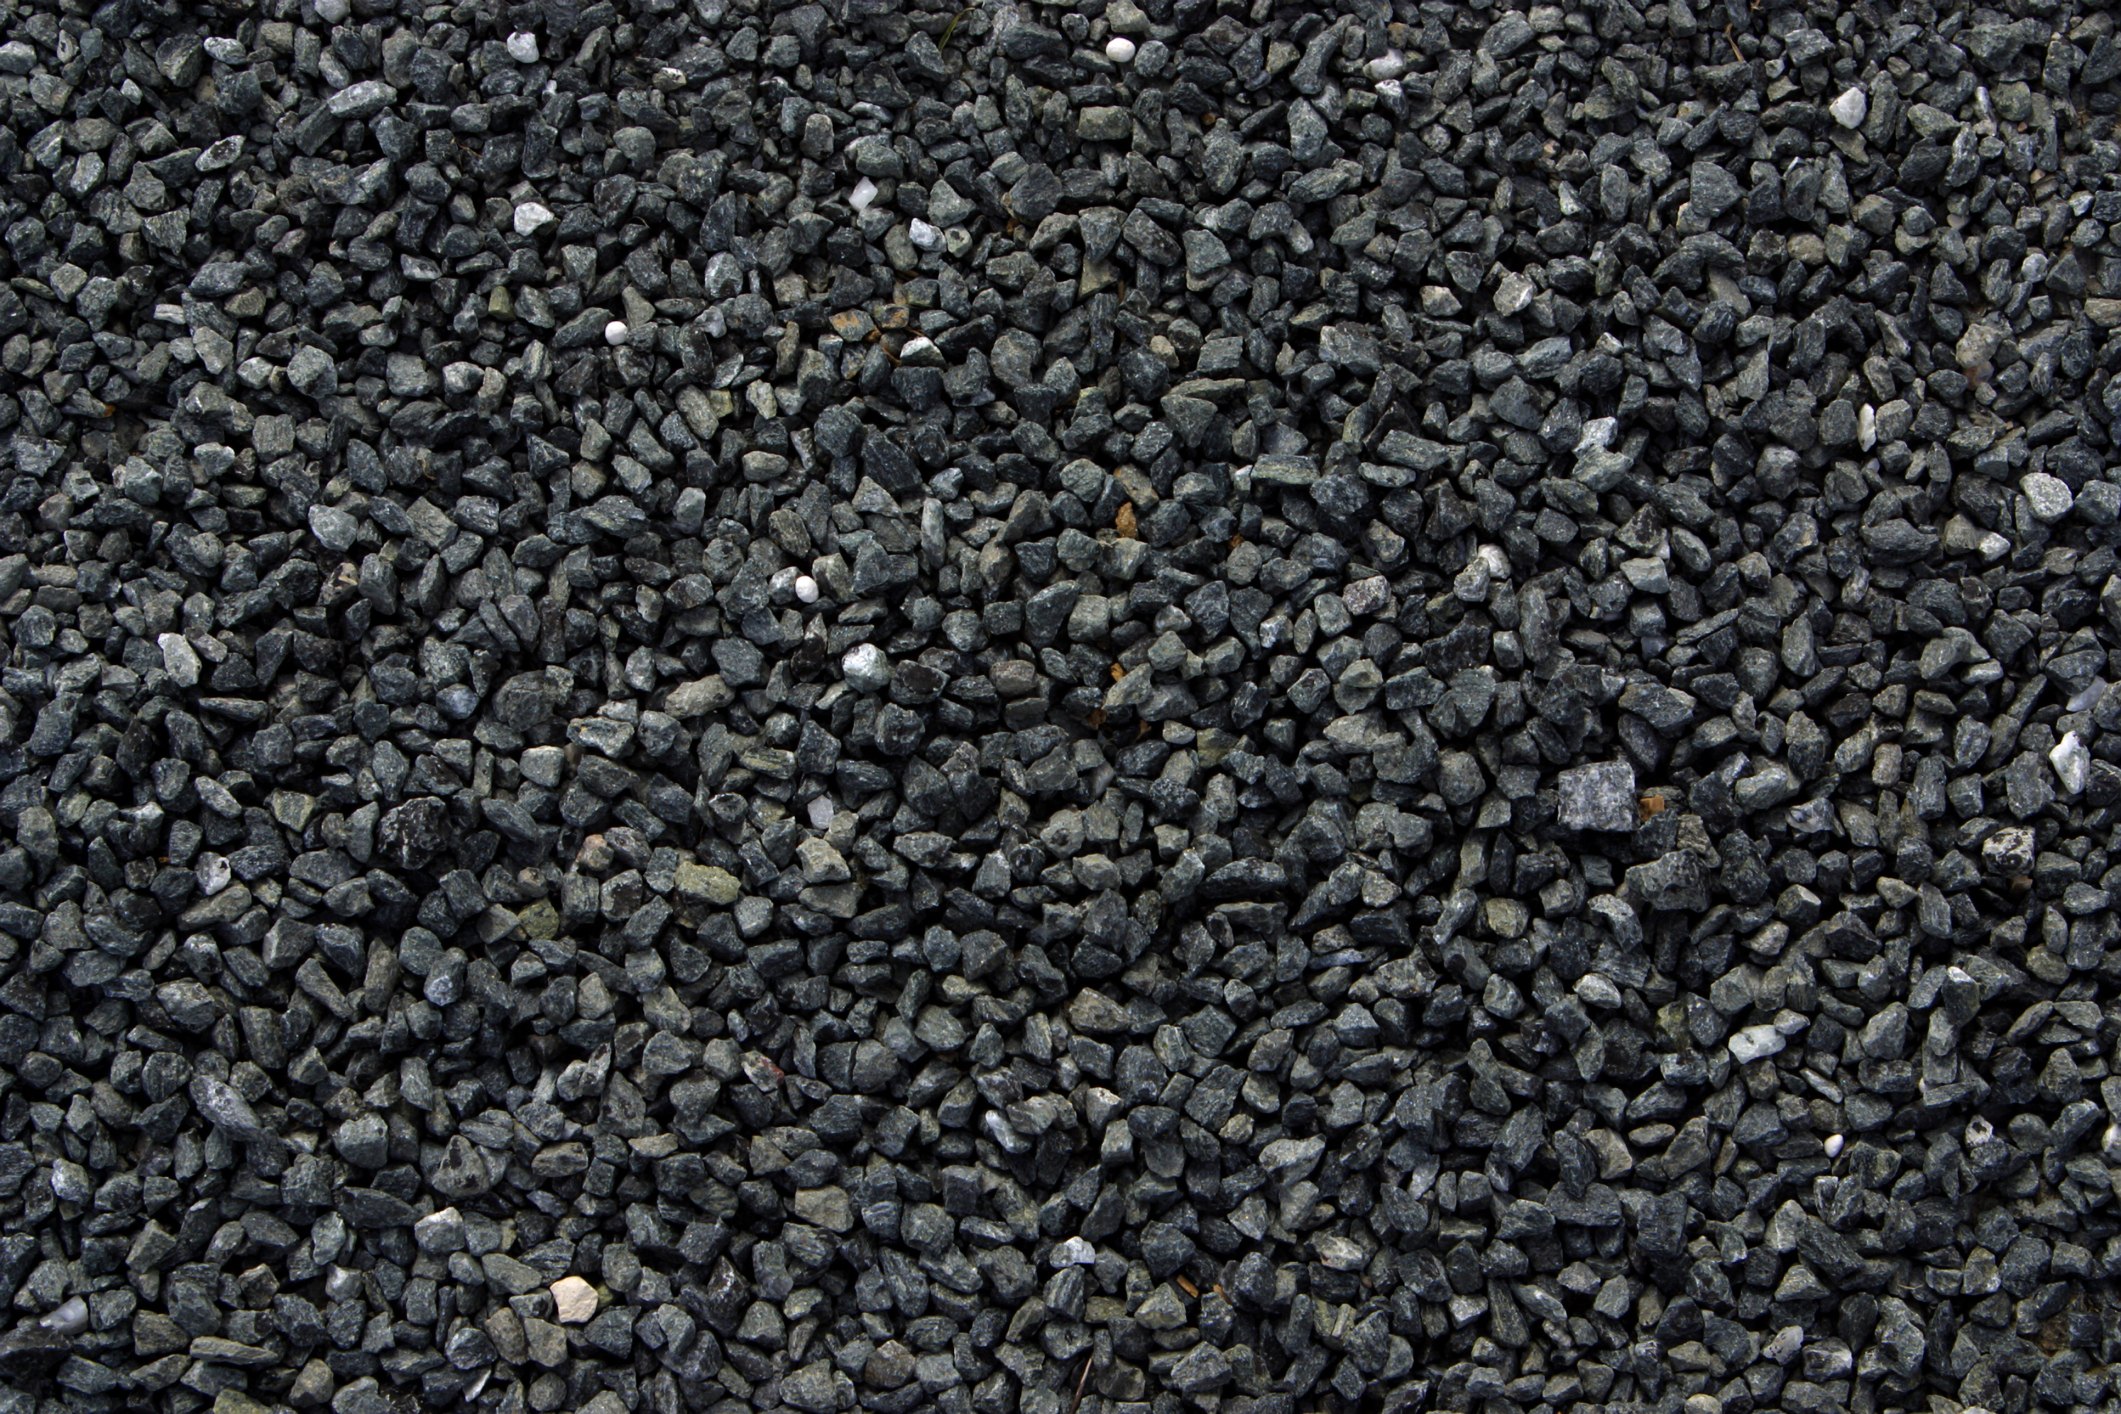 How to Put a Crushed Granite Walkway in Your Backyard | eHow